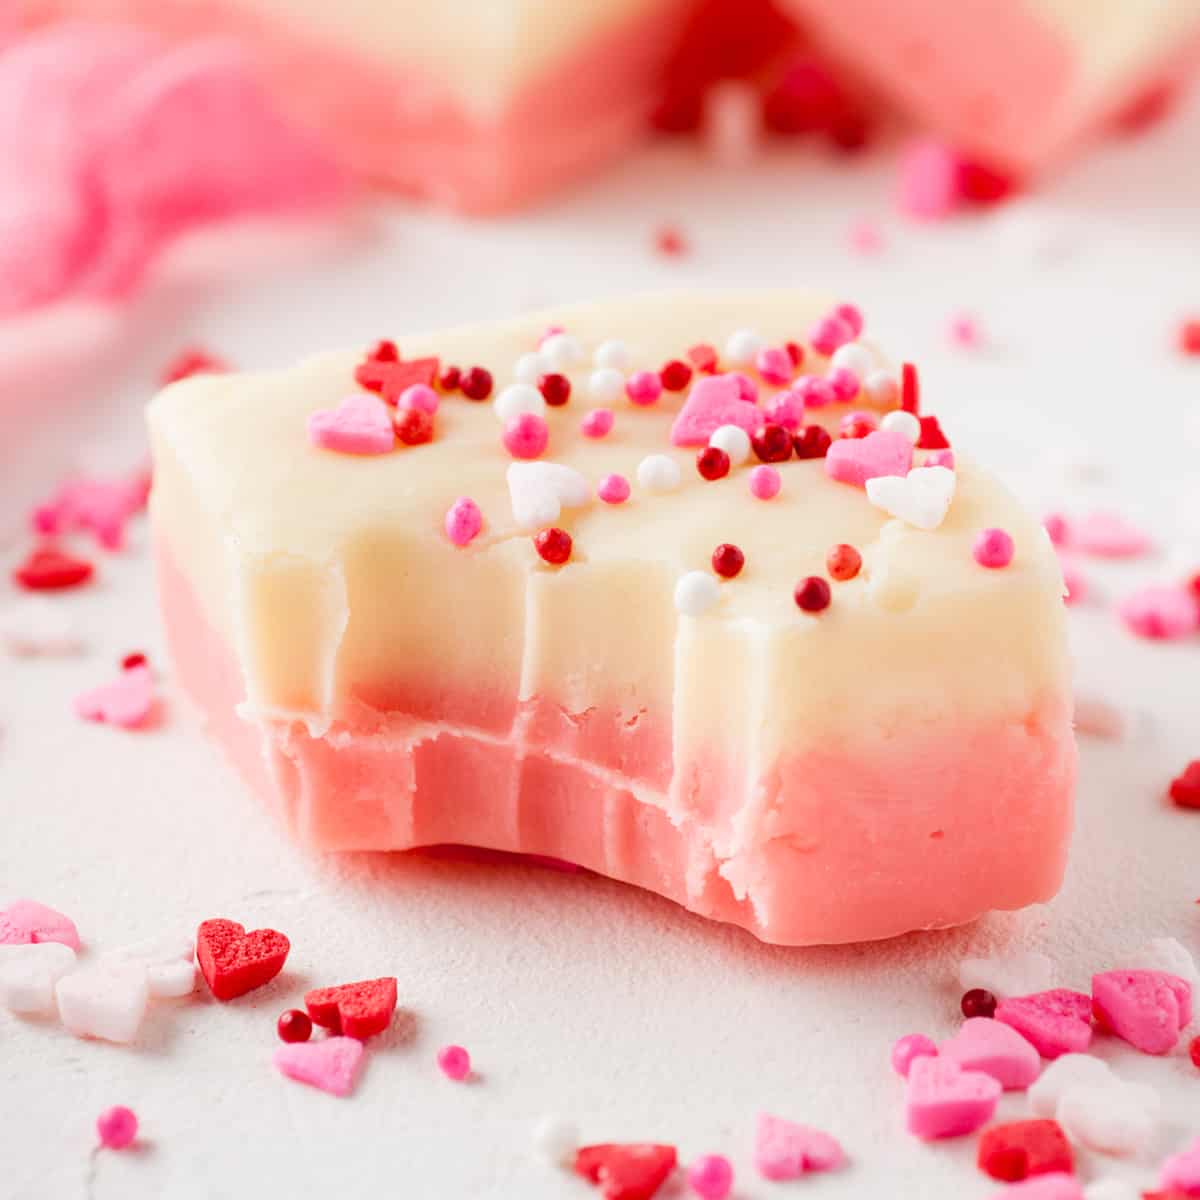 Piece of Valentines fudge with pink and white layers and topped with festive pink and red sprinkles. A bite has been taken out of the fudge.